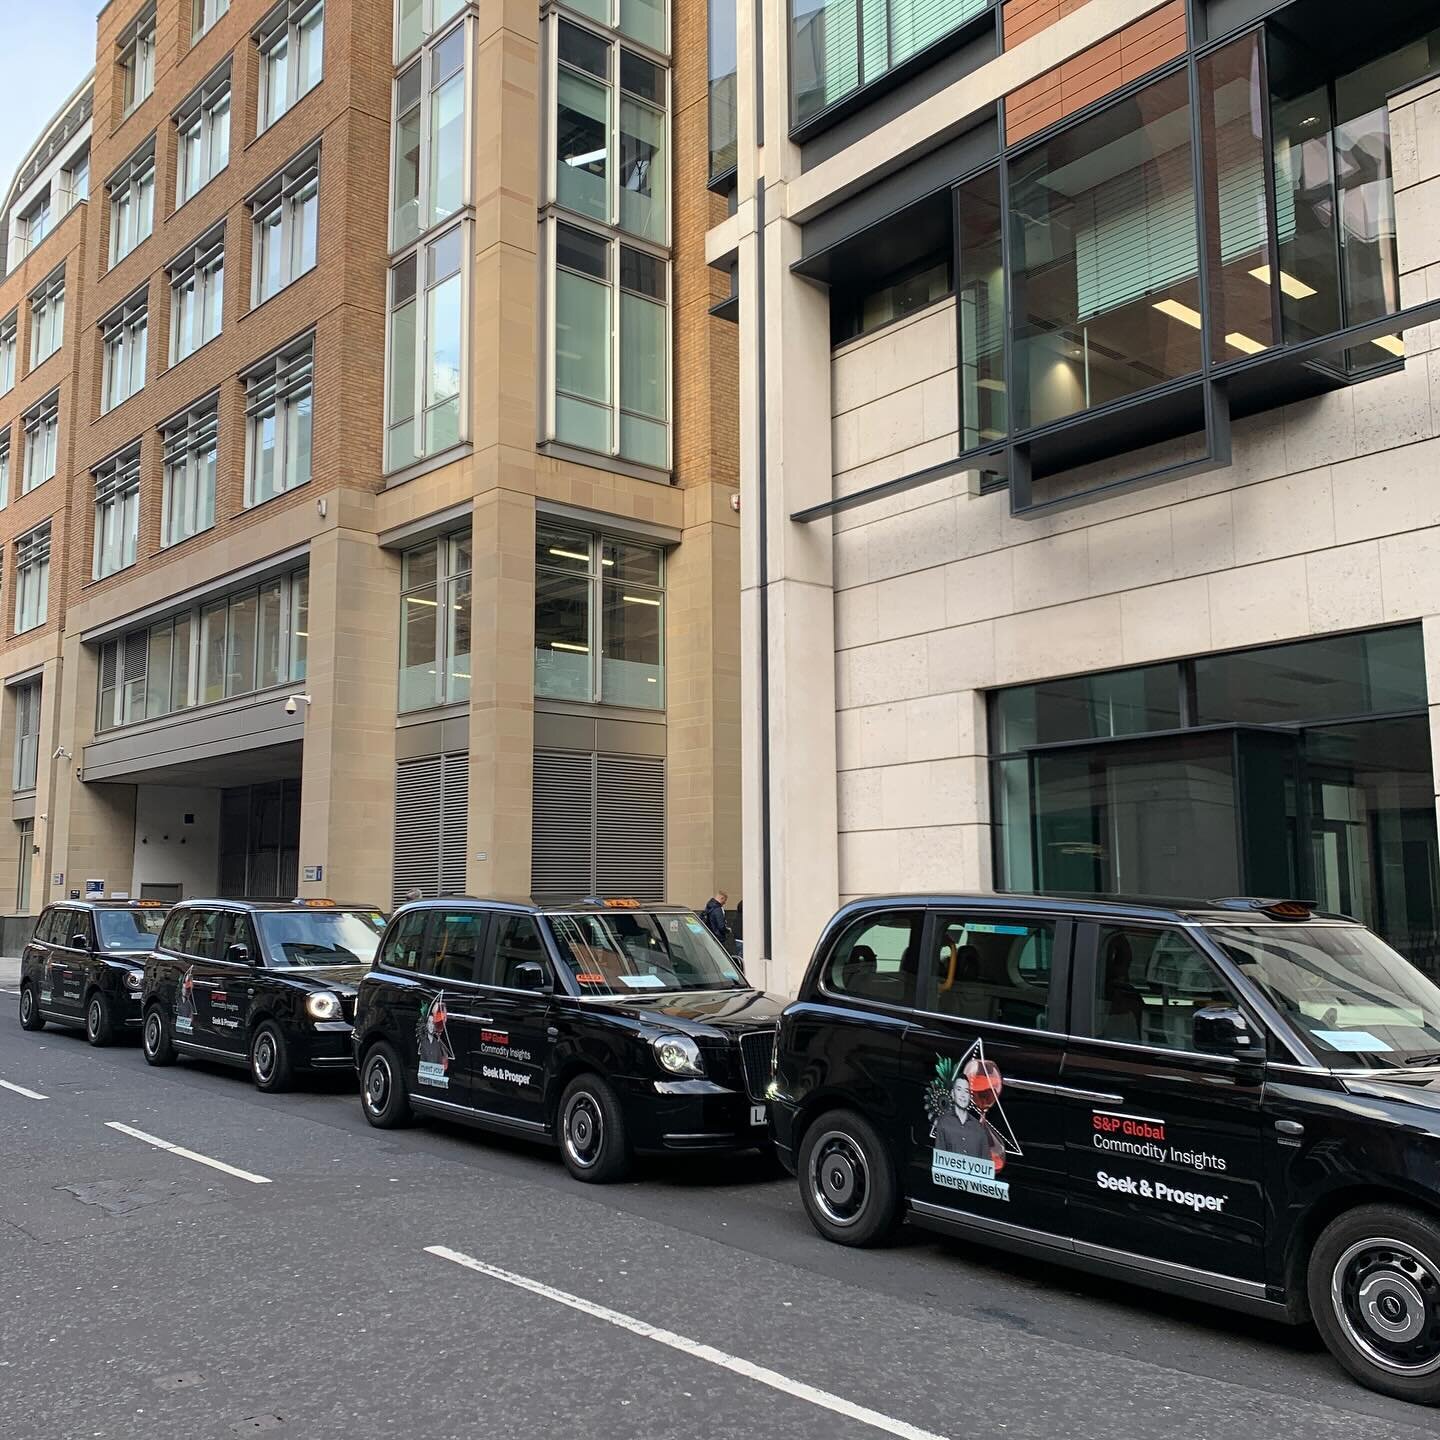 It&rsquo;s the start of #internationalenergyweek we are transporting @sp_global guests and vips around the city for multiple events throughout the week. 

#london #events #electrictaxi #blackcab #ev #greentransportation #knowledge